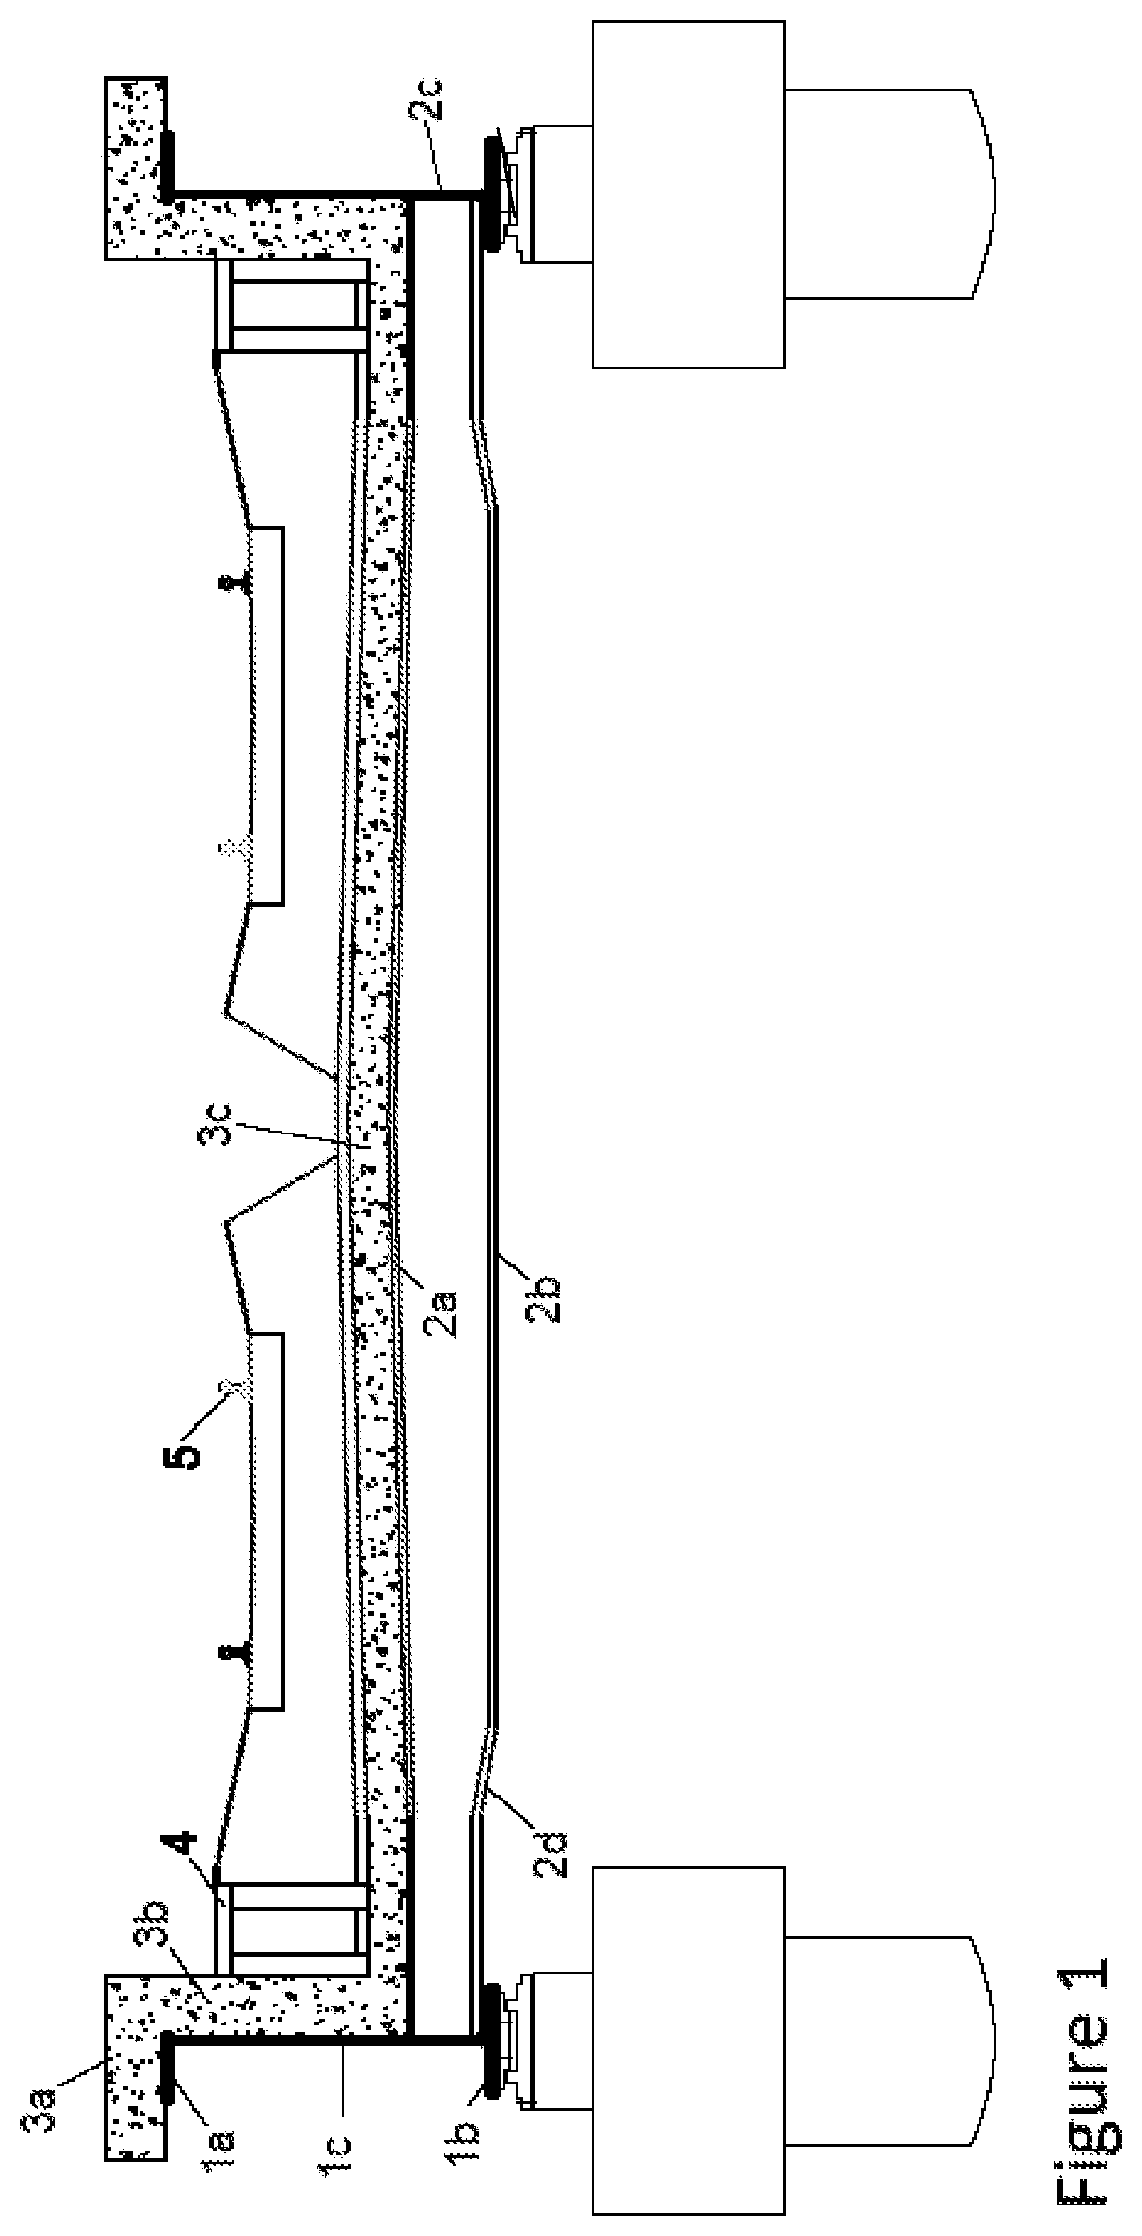 System for construction of composite U shaped reinforced girders bridge deck and methods thereof